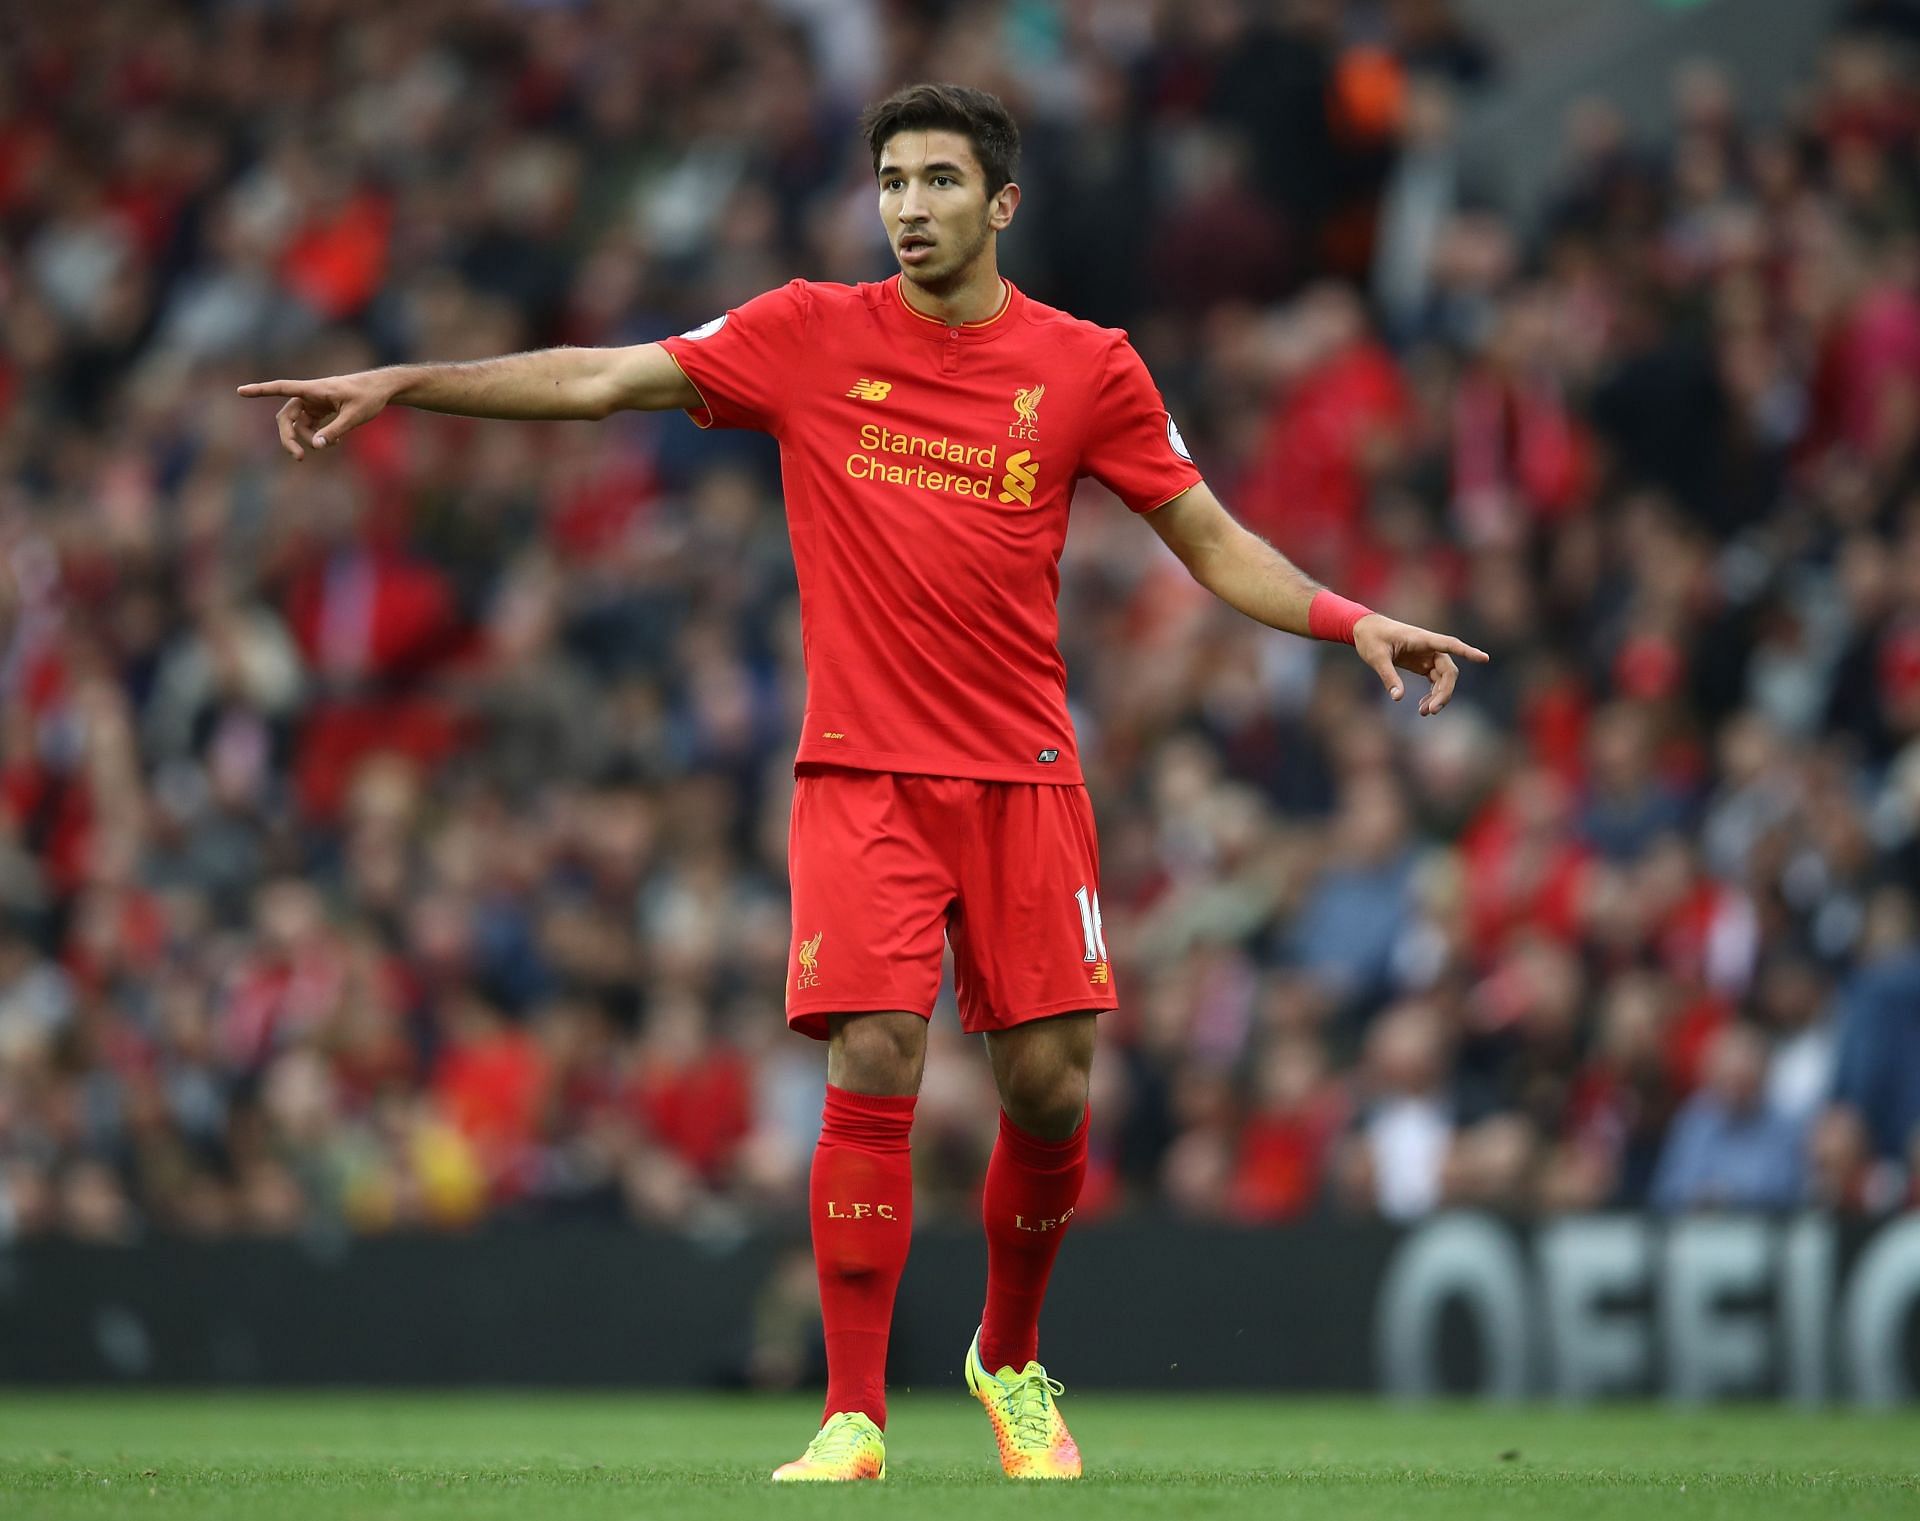 Marko Grujic failed to live up to expectations at Liverpool